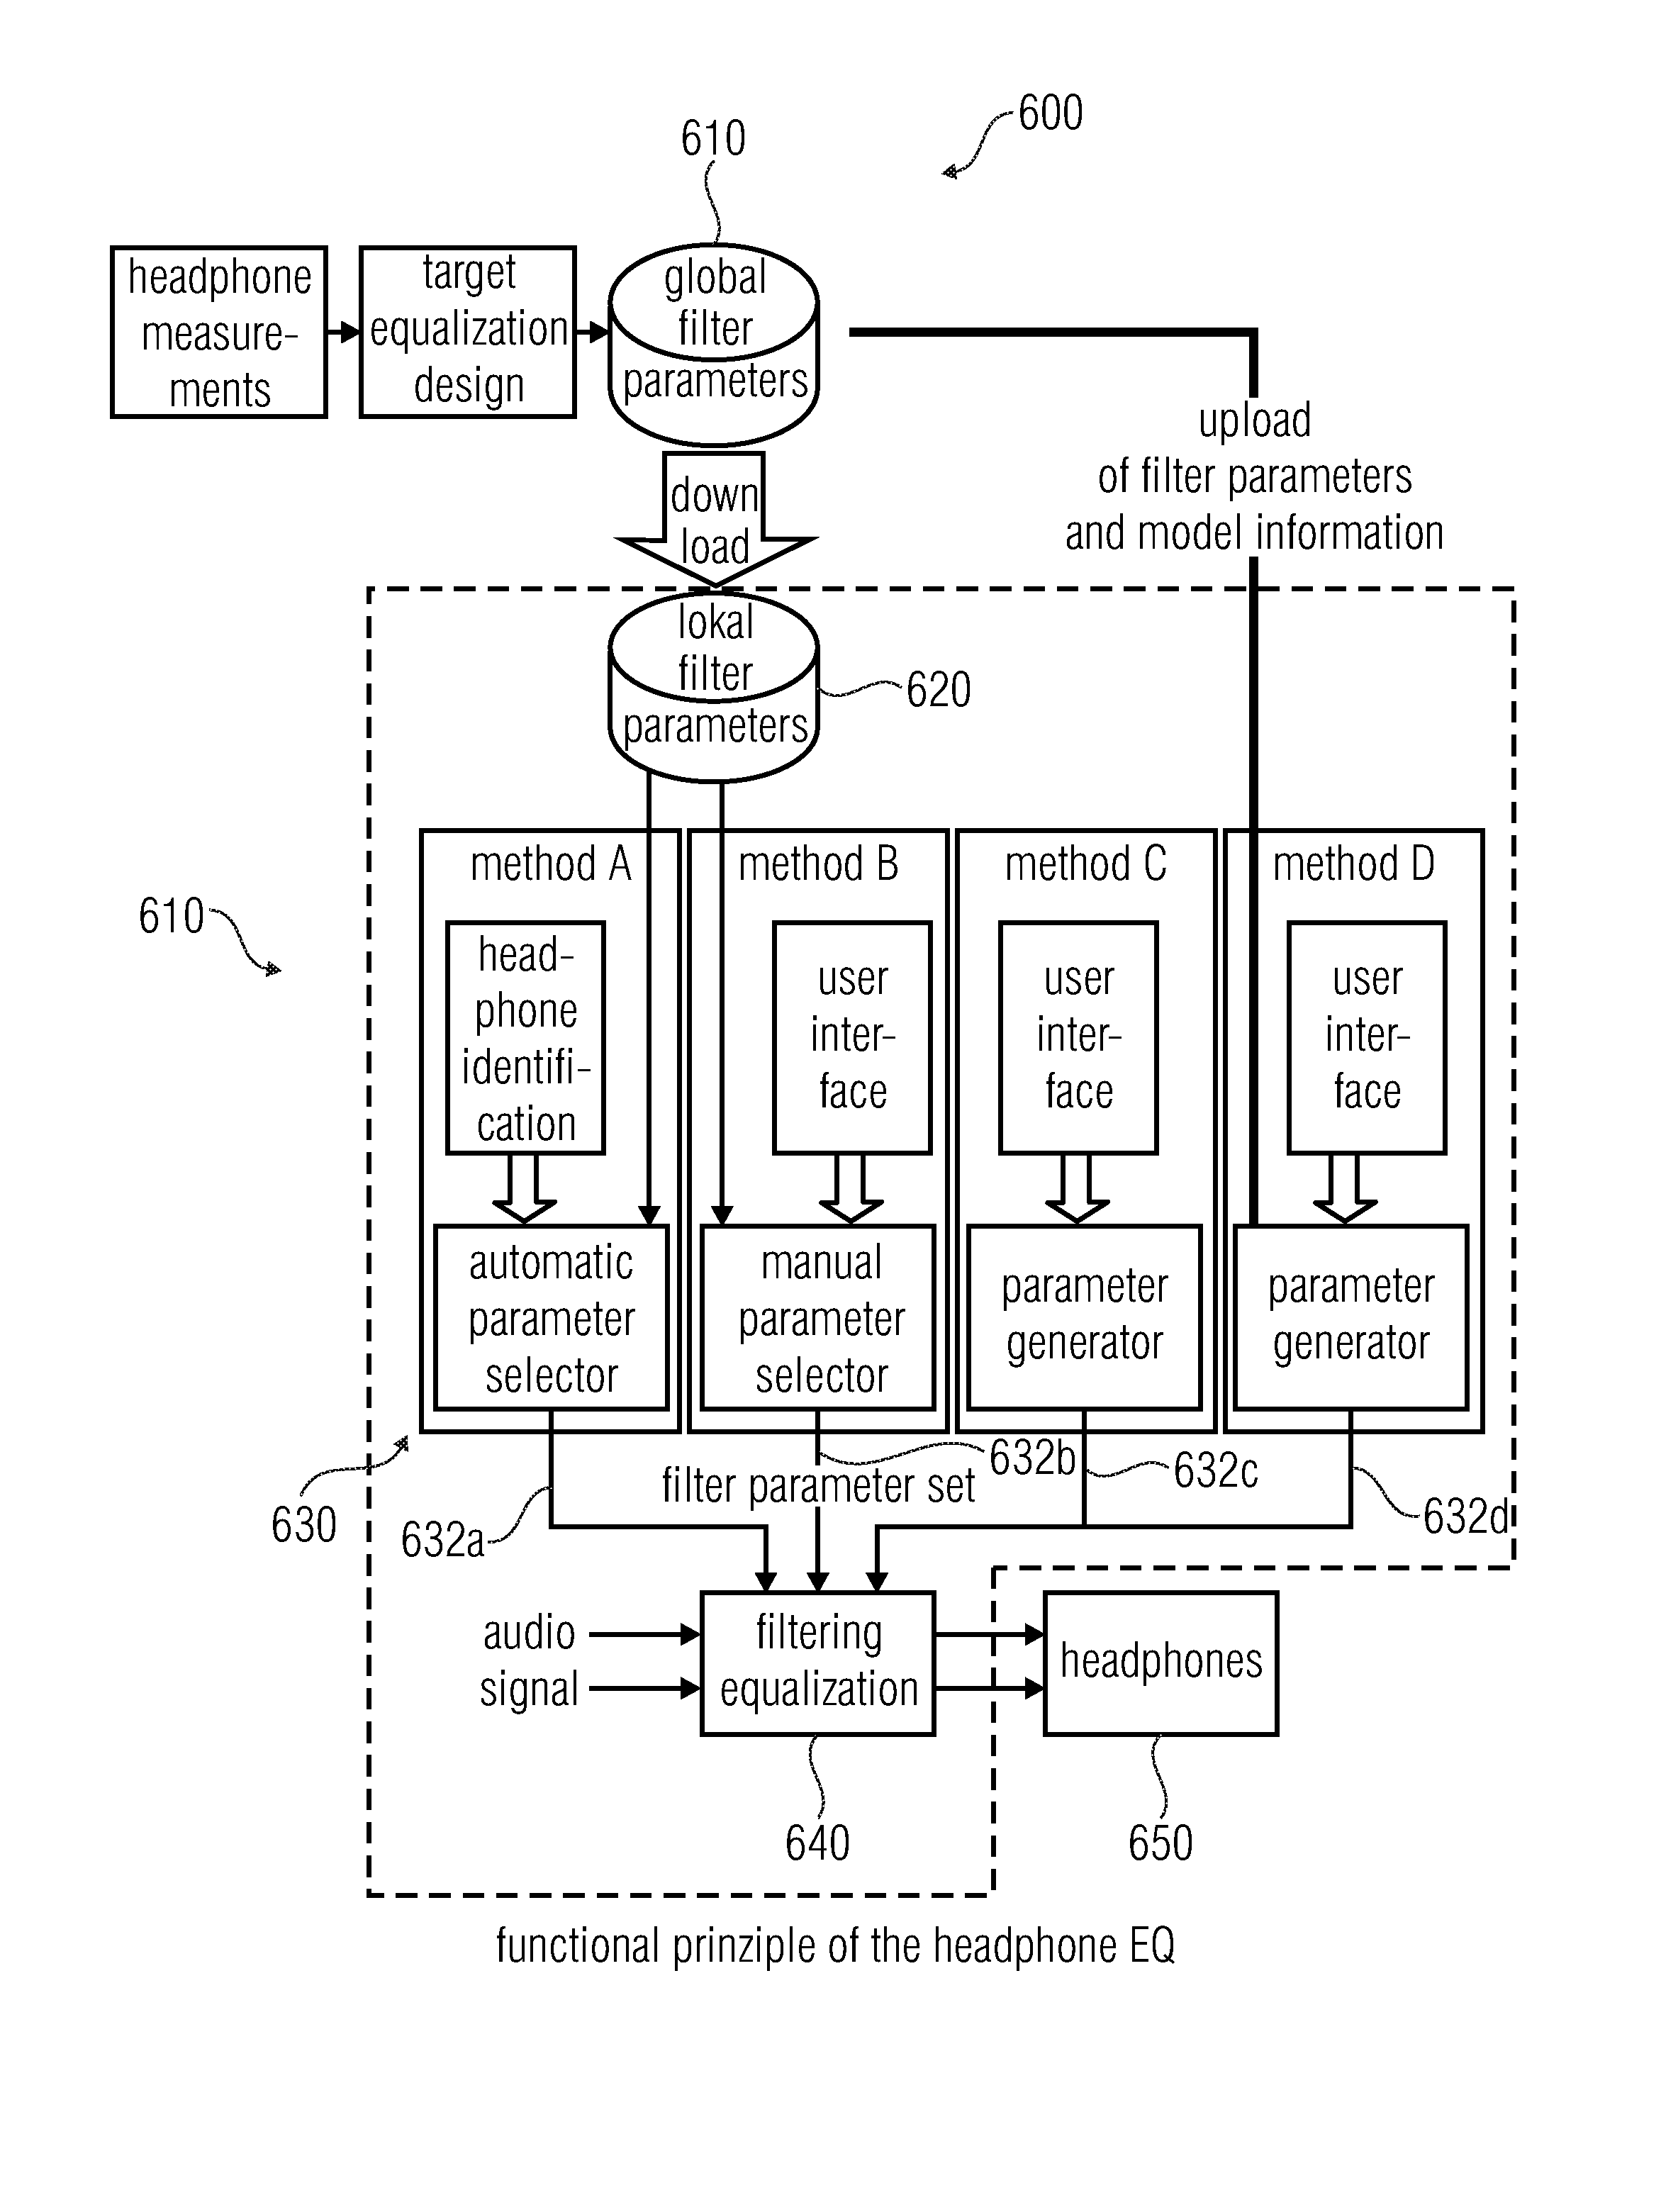 Apparatus for providing an audio signal for reproduction by a sound transducer, system, method and computer program